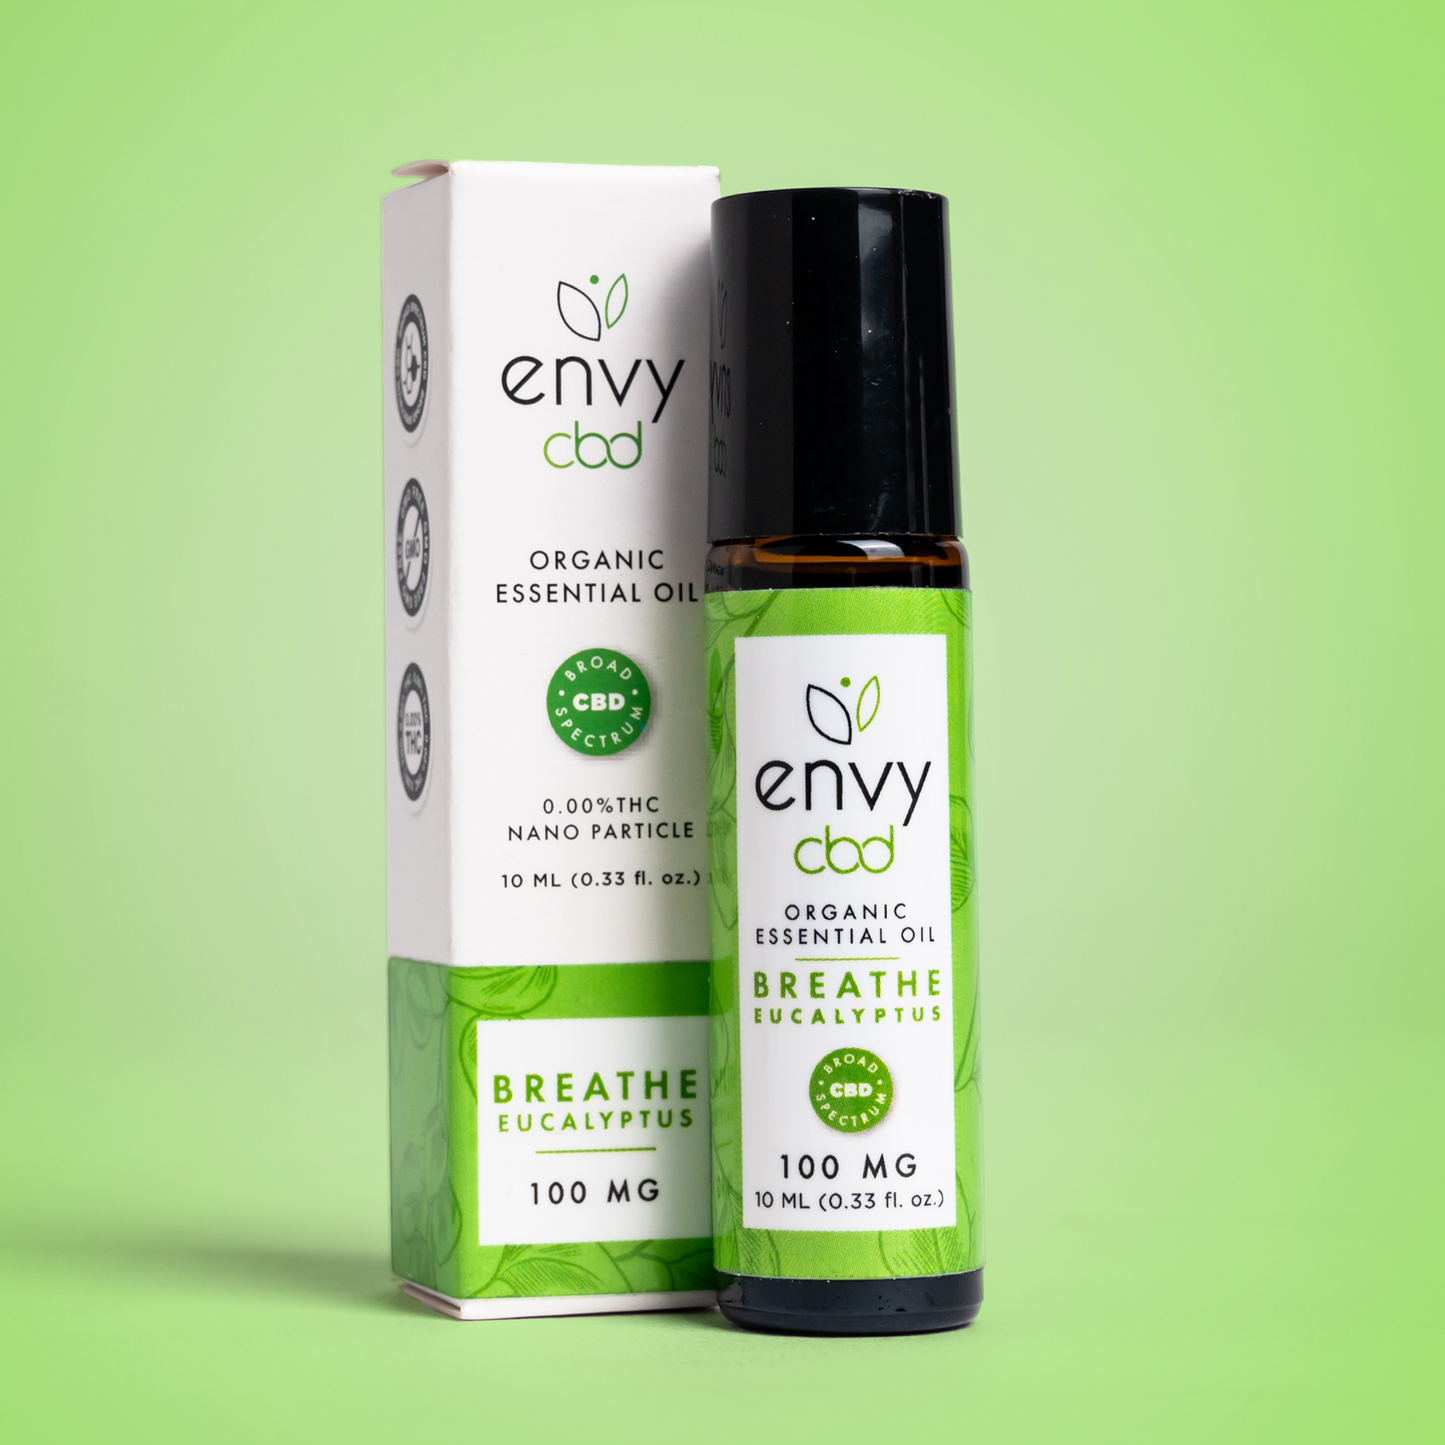 Envy CBD – Essential Oil Roll-On 100MG Broad Spectrum CBD Topical Best Sales Price - Tincture Oil